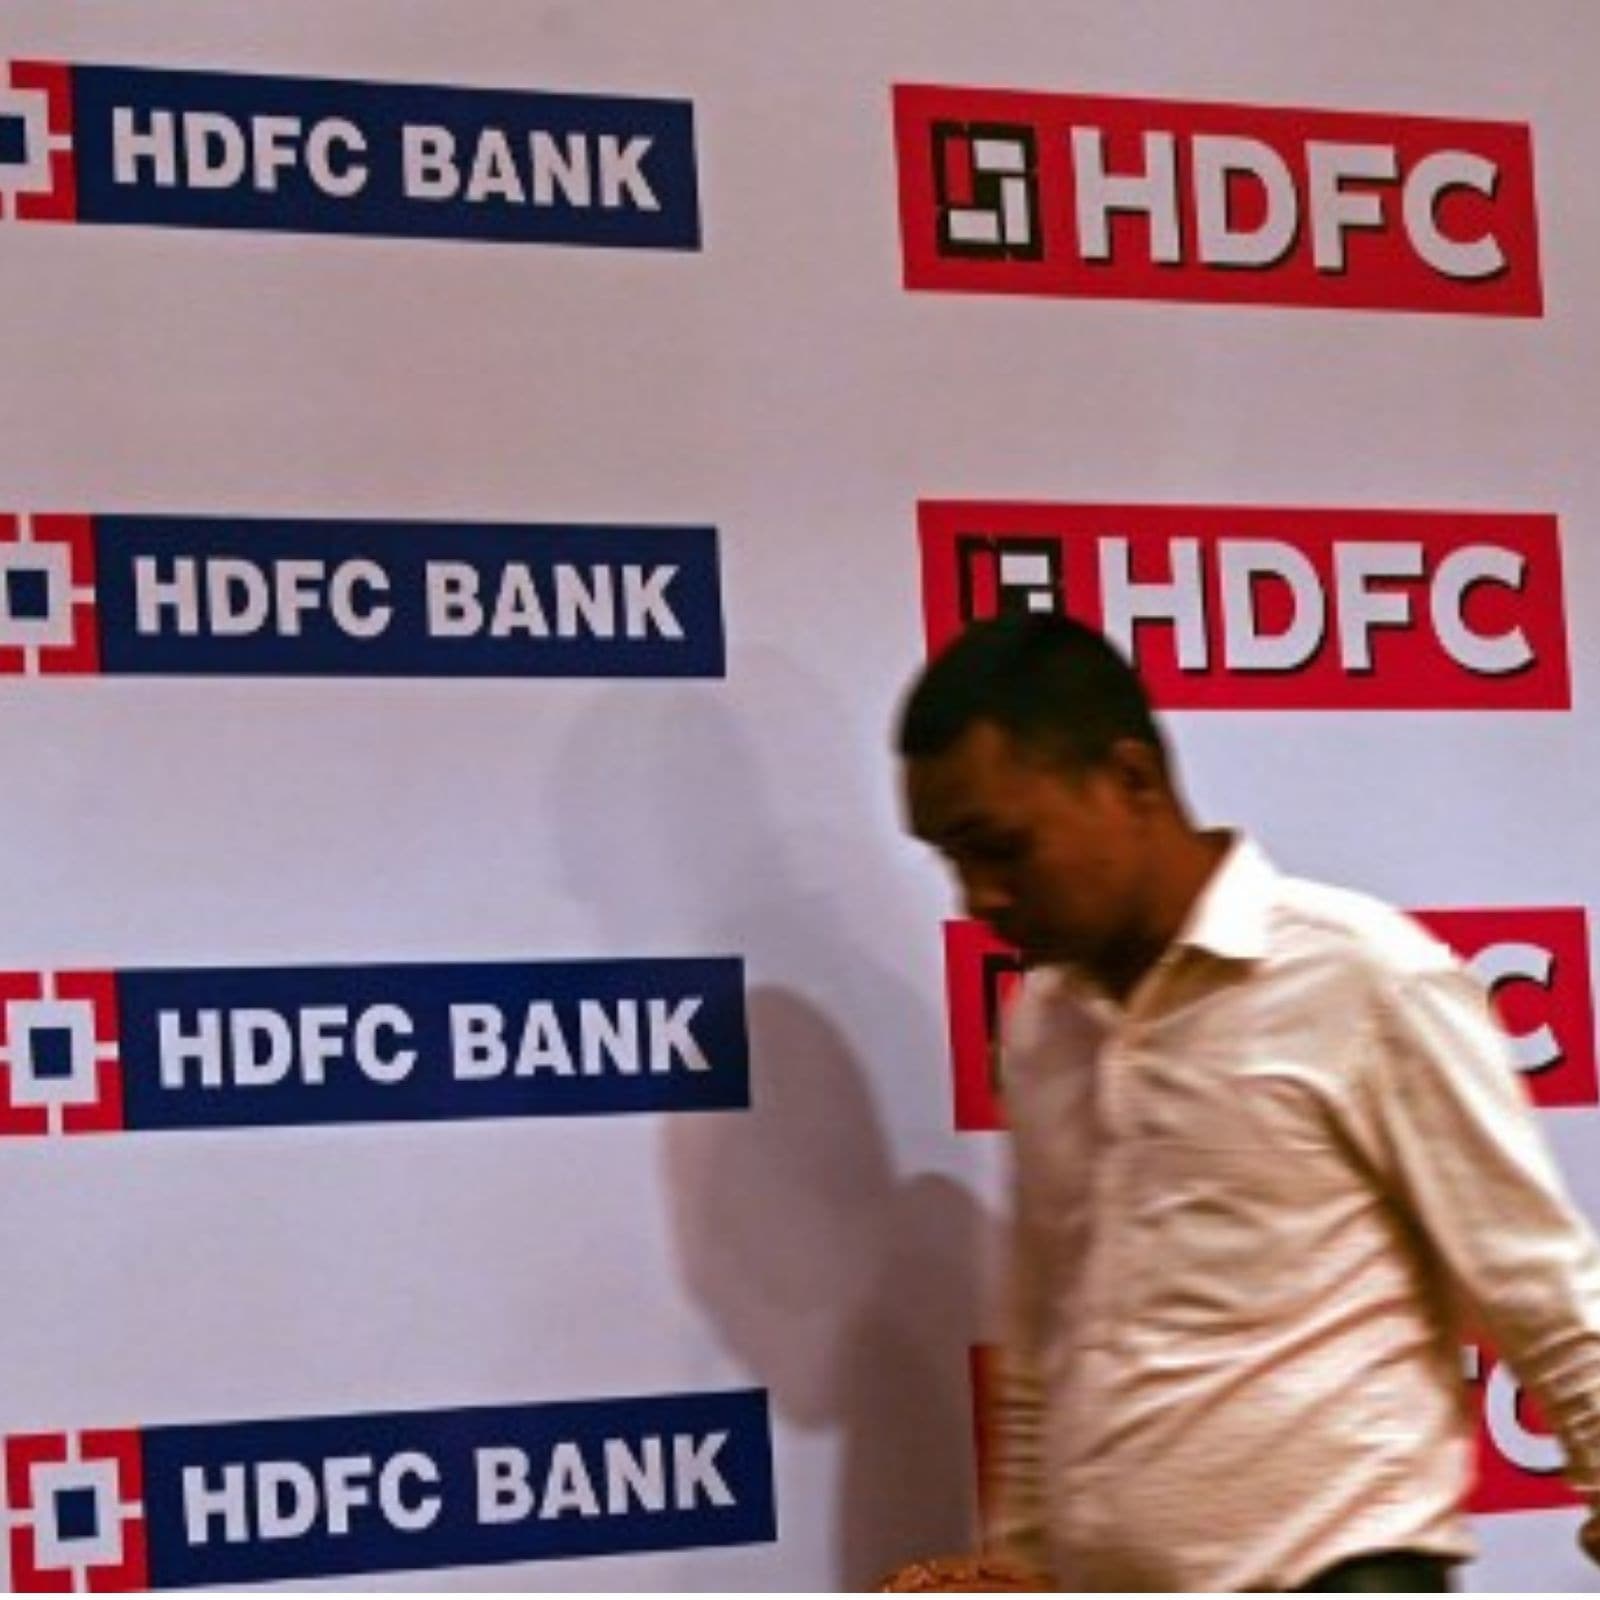 Hdfc bank share price